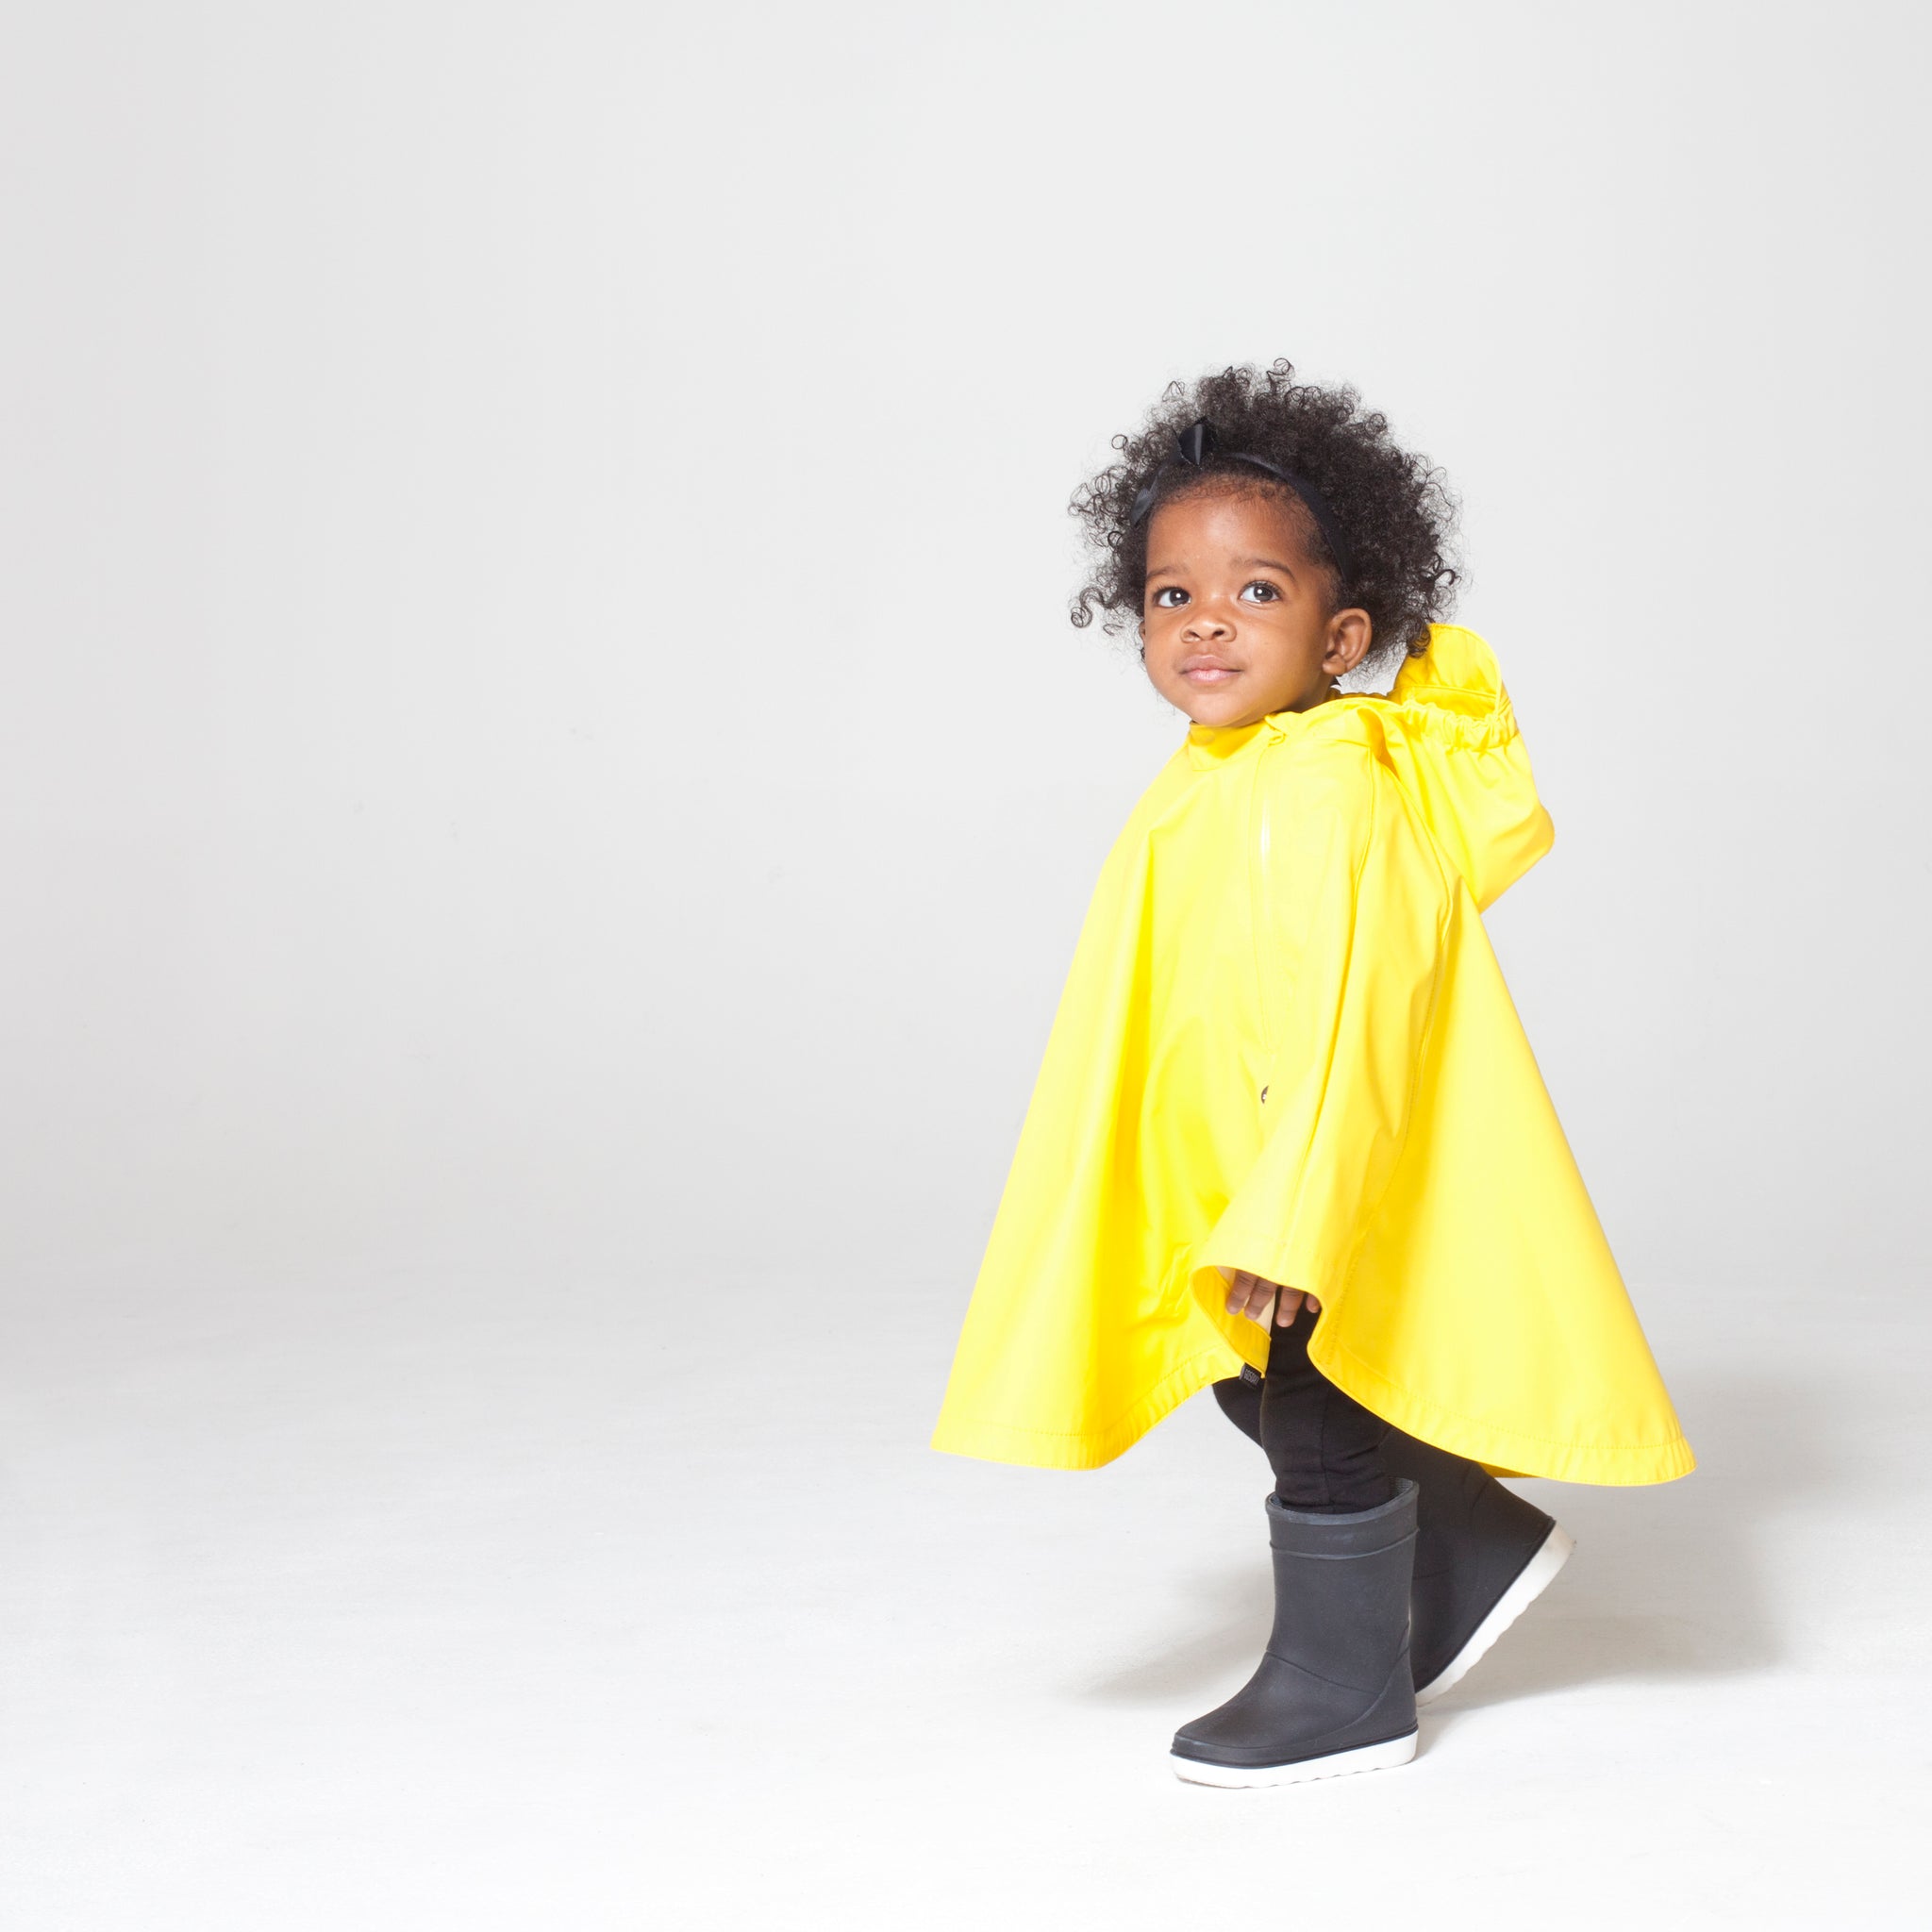 GOSOAKY designer cool modern stylish rainwear for kids waterproof jackets trousers capes all in ones